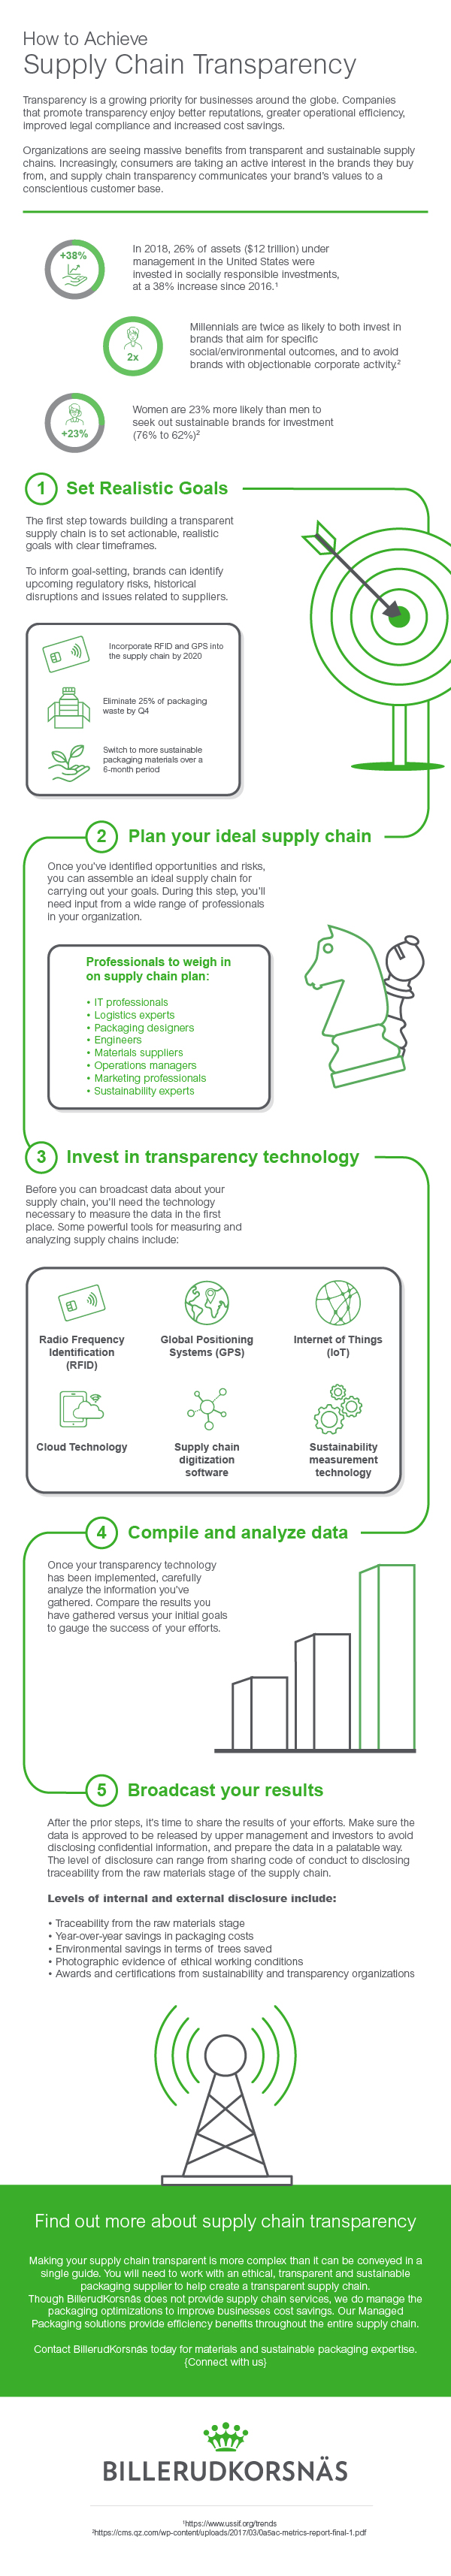 How to achieve supply chain transparency_v3.1.jpg